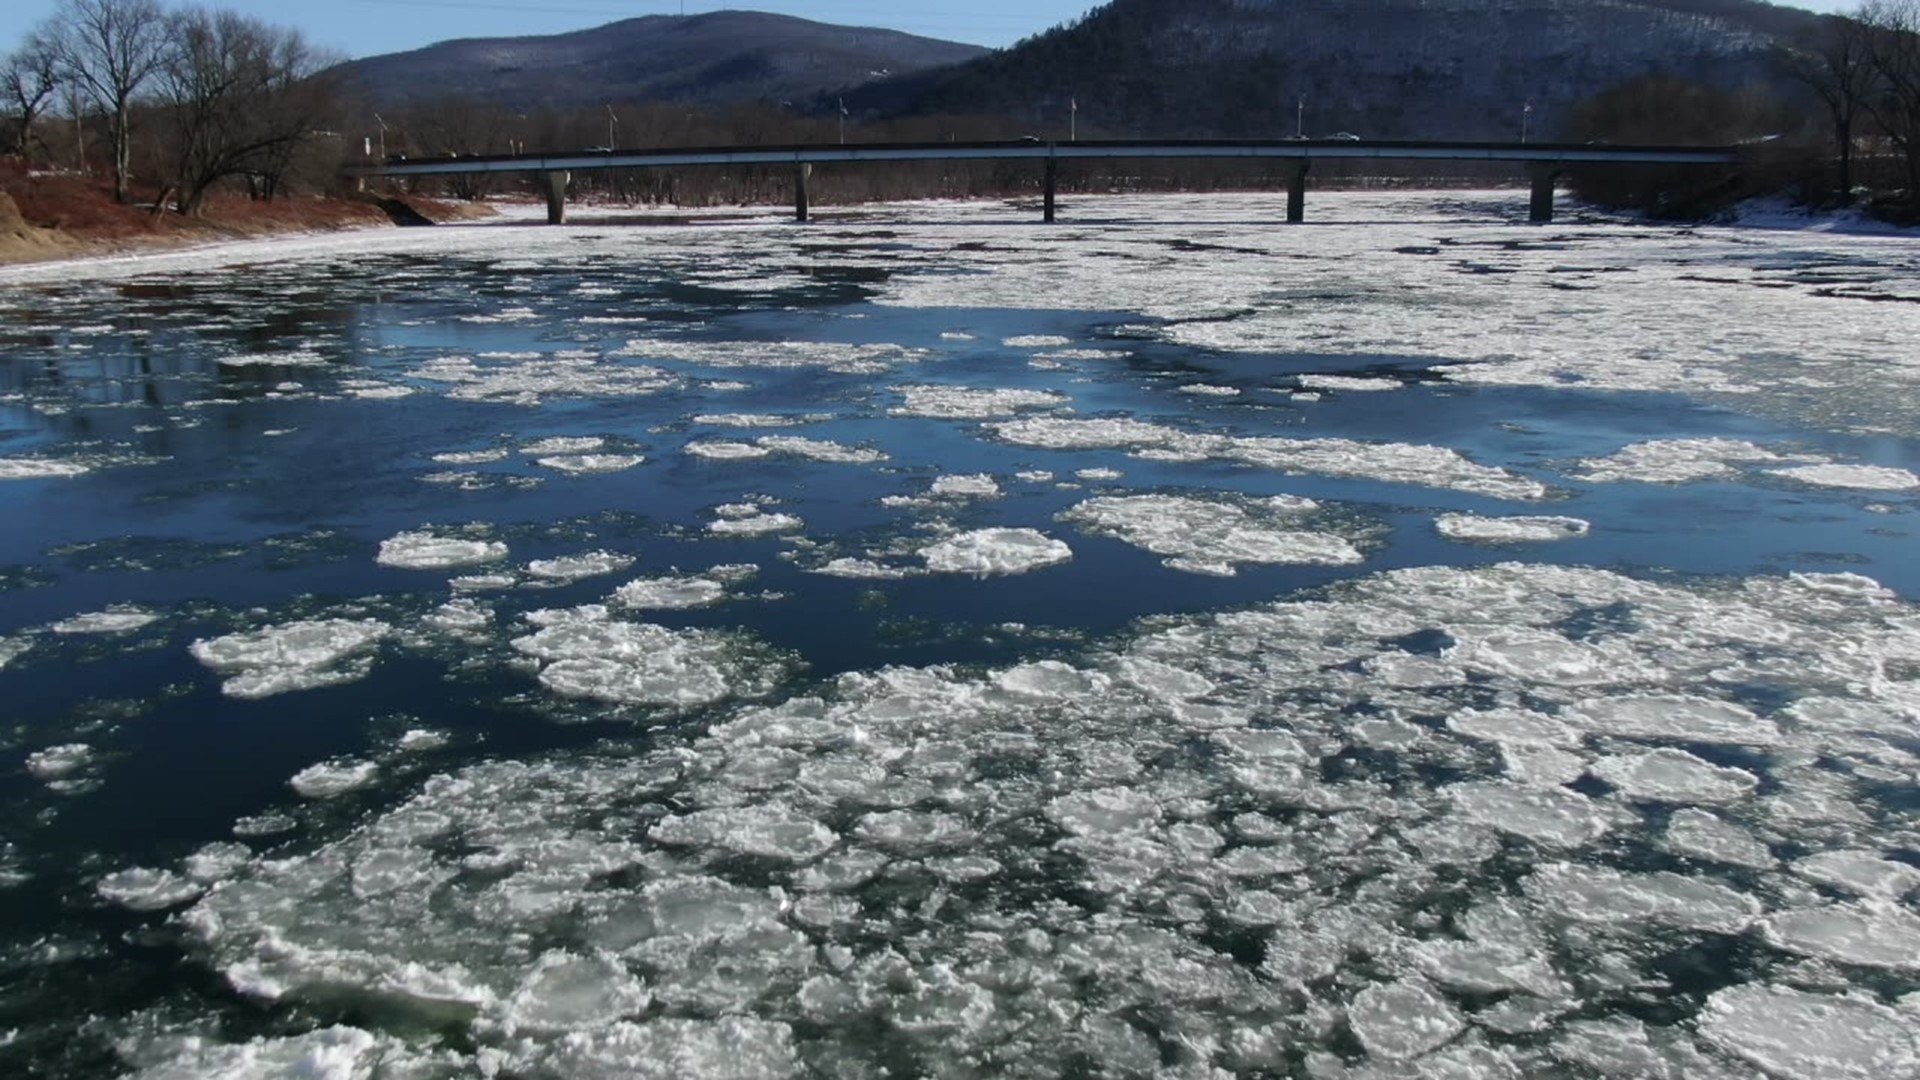 Skycam 16 shows us a Susquehanna River transformed, the water now filled with a patchwork of ice.